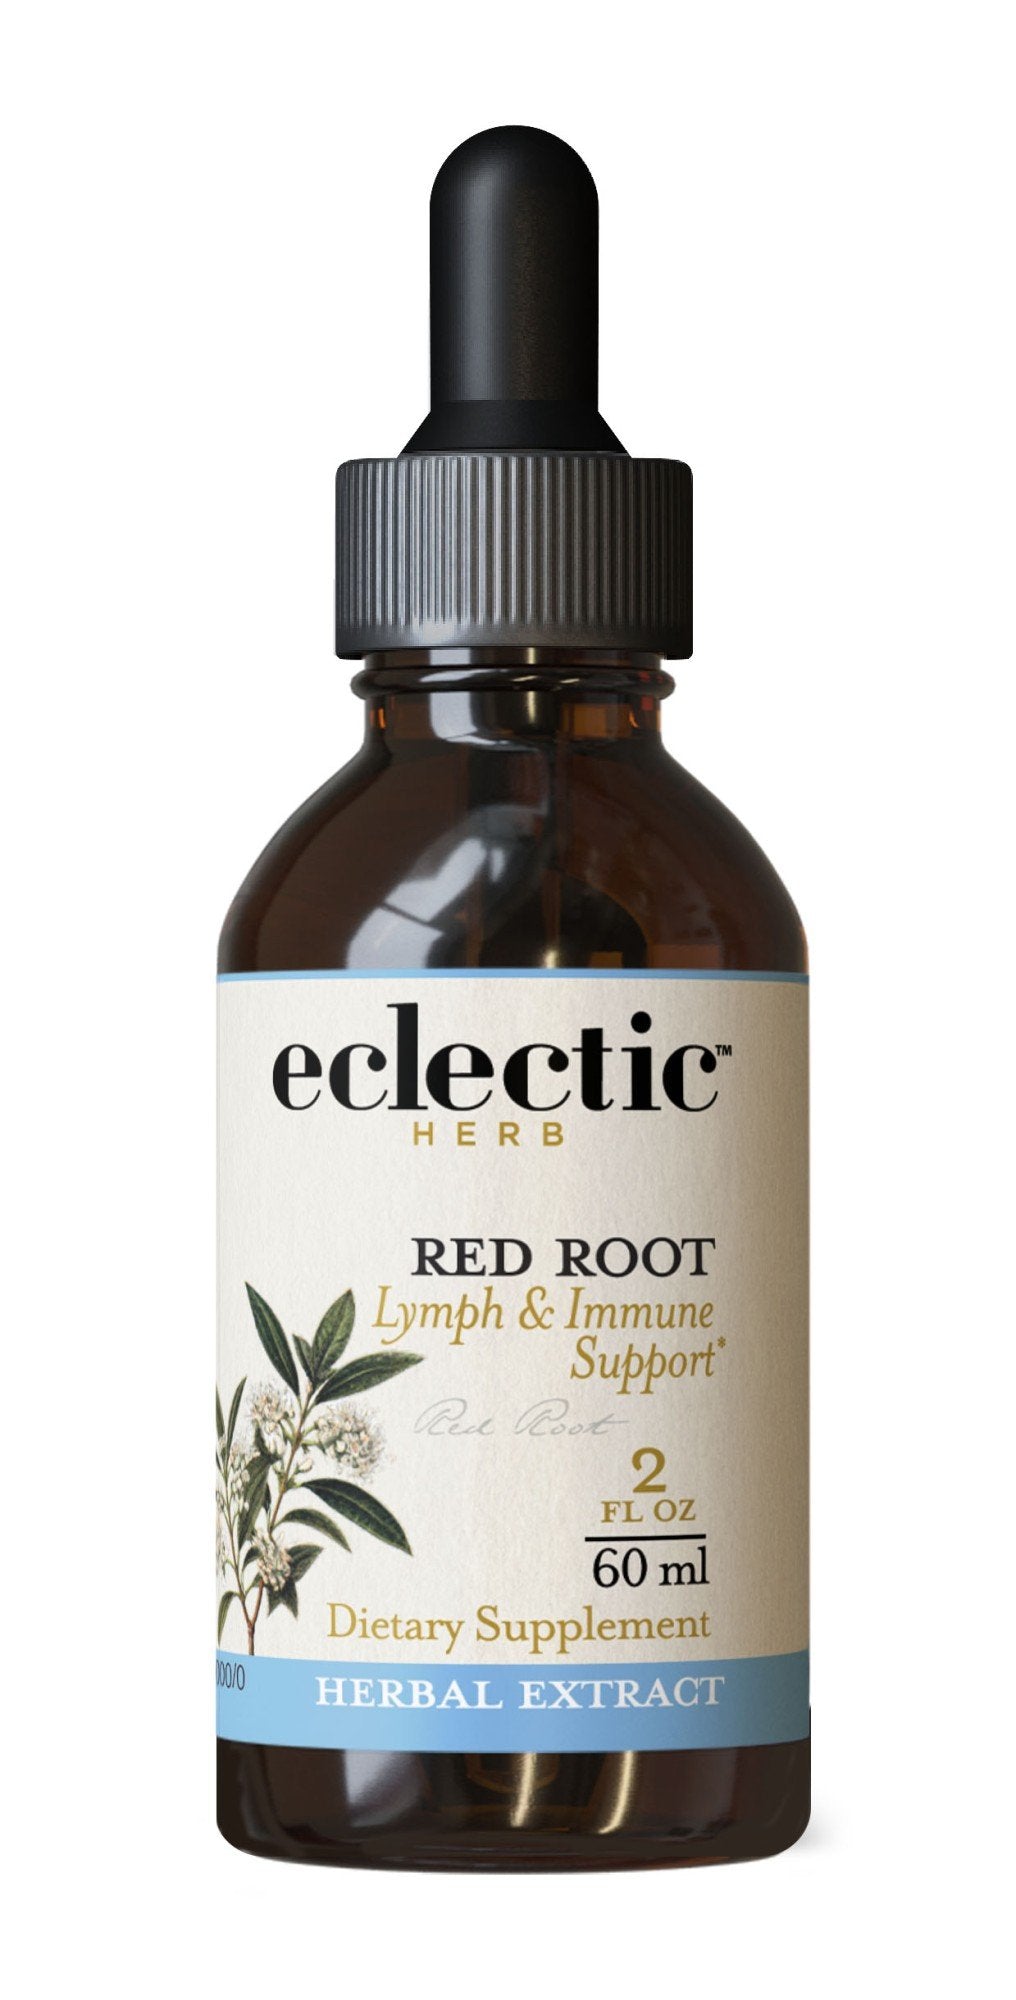 Eclectic Herb Red Root Extract 2 oz Liquid